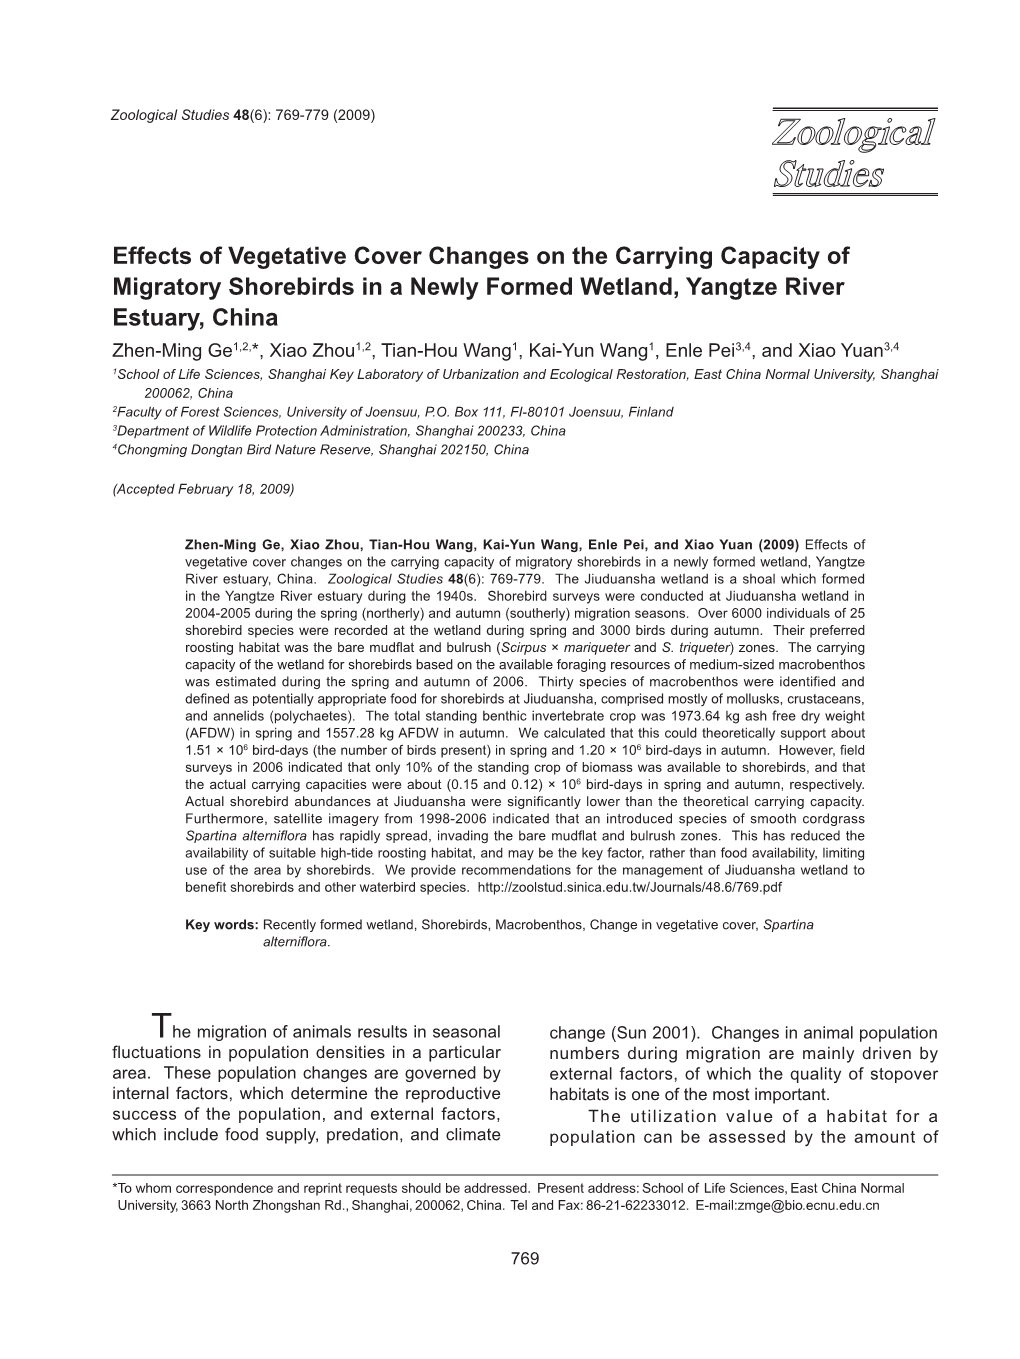 Effects of Vegetative Cover Changes on the Carrying Capacity Of